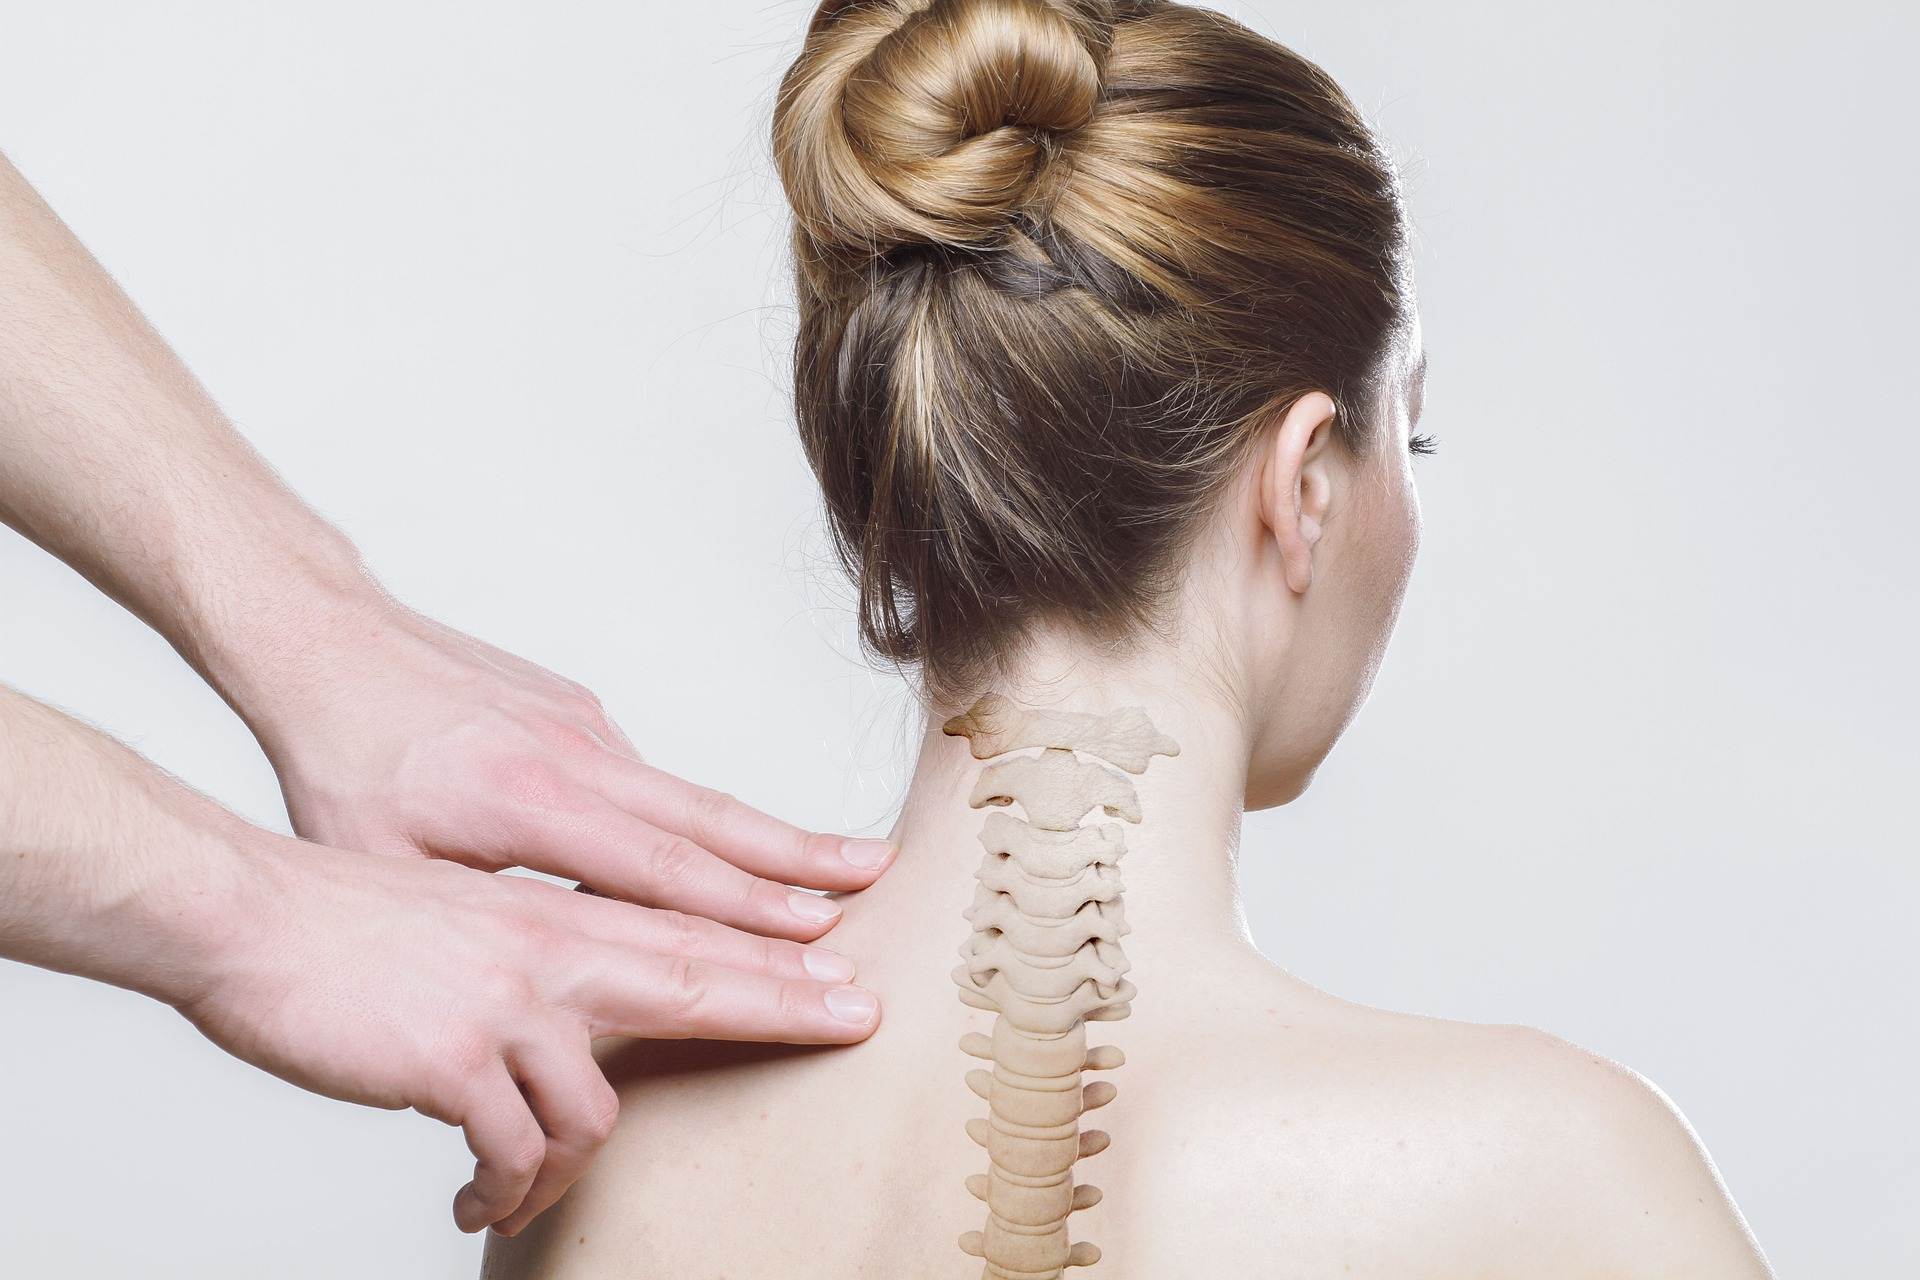 Neck Arthritis is literally a ‘Pain in the Neck’